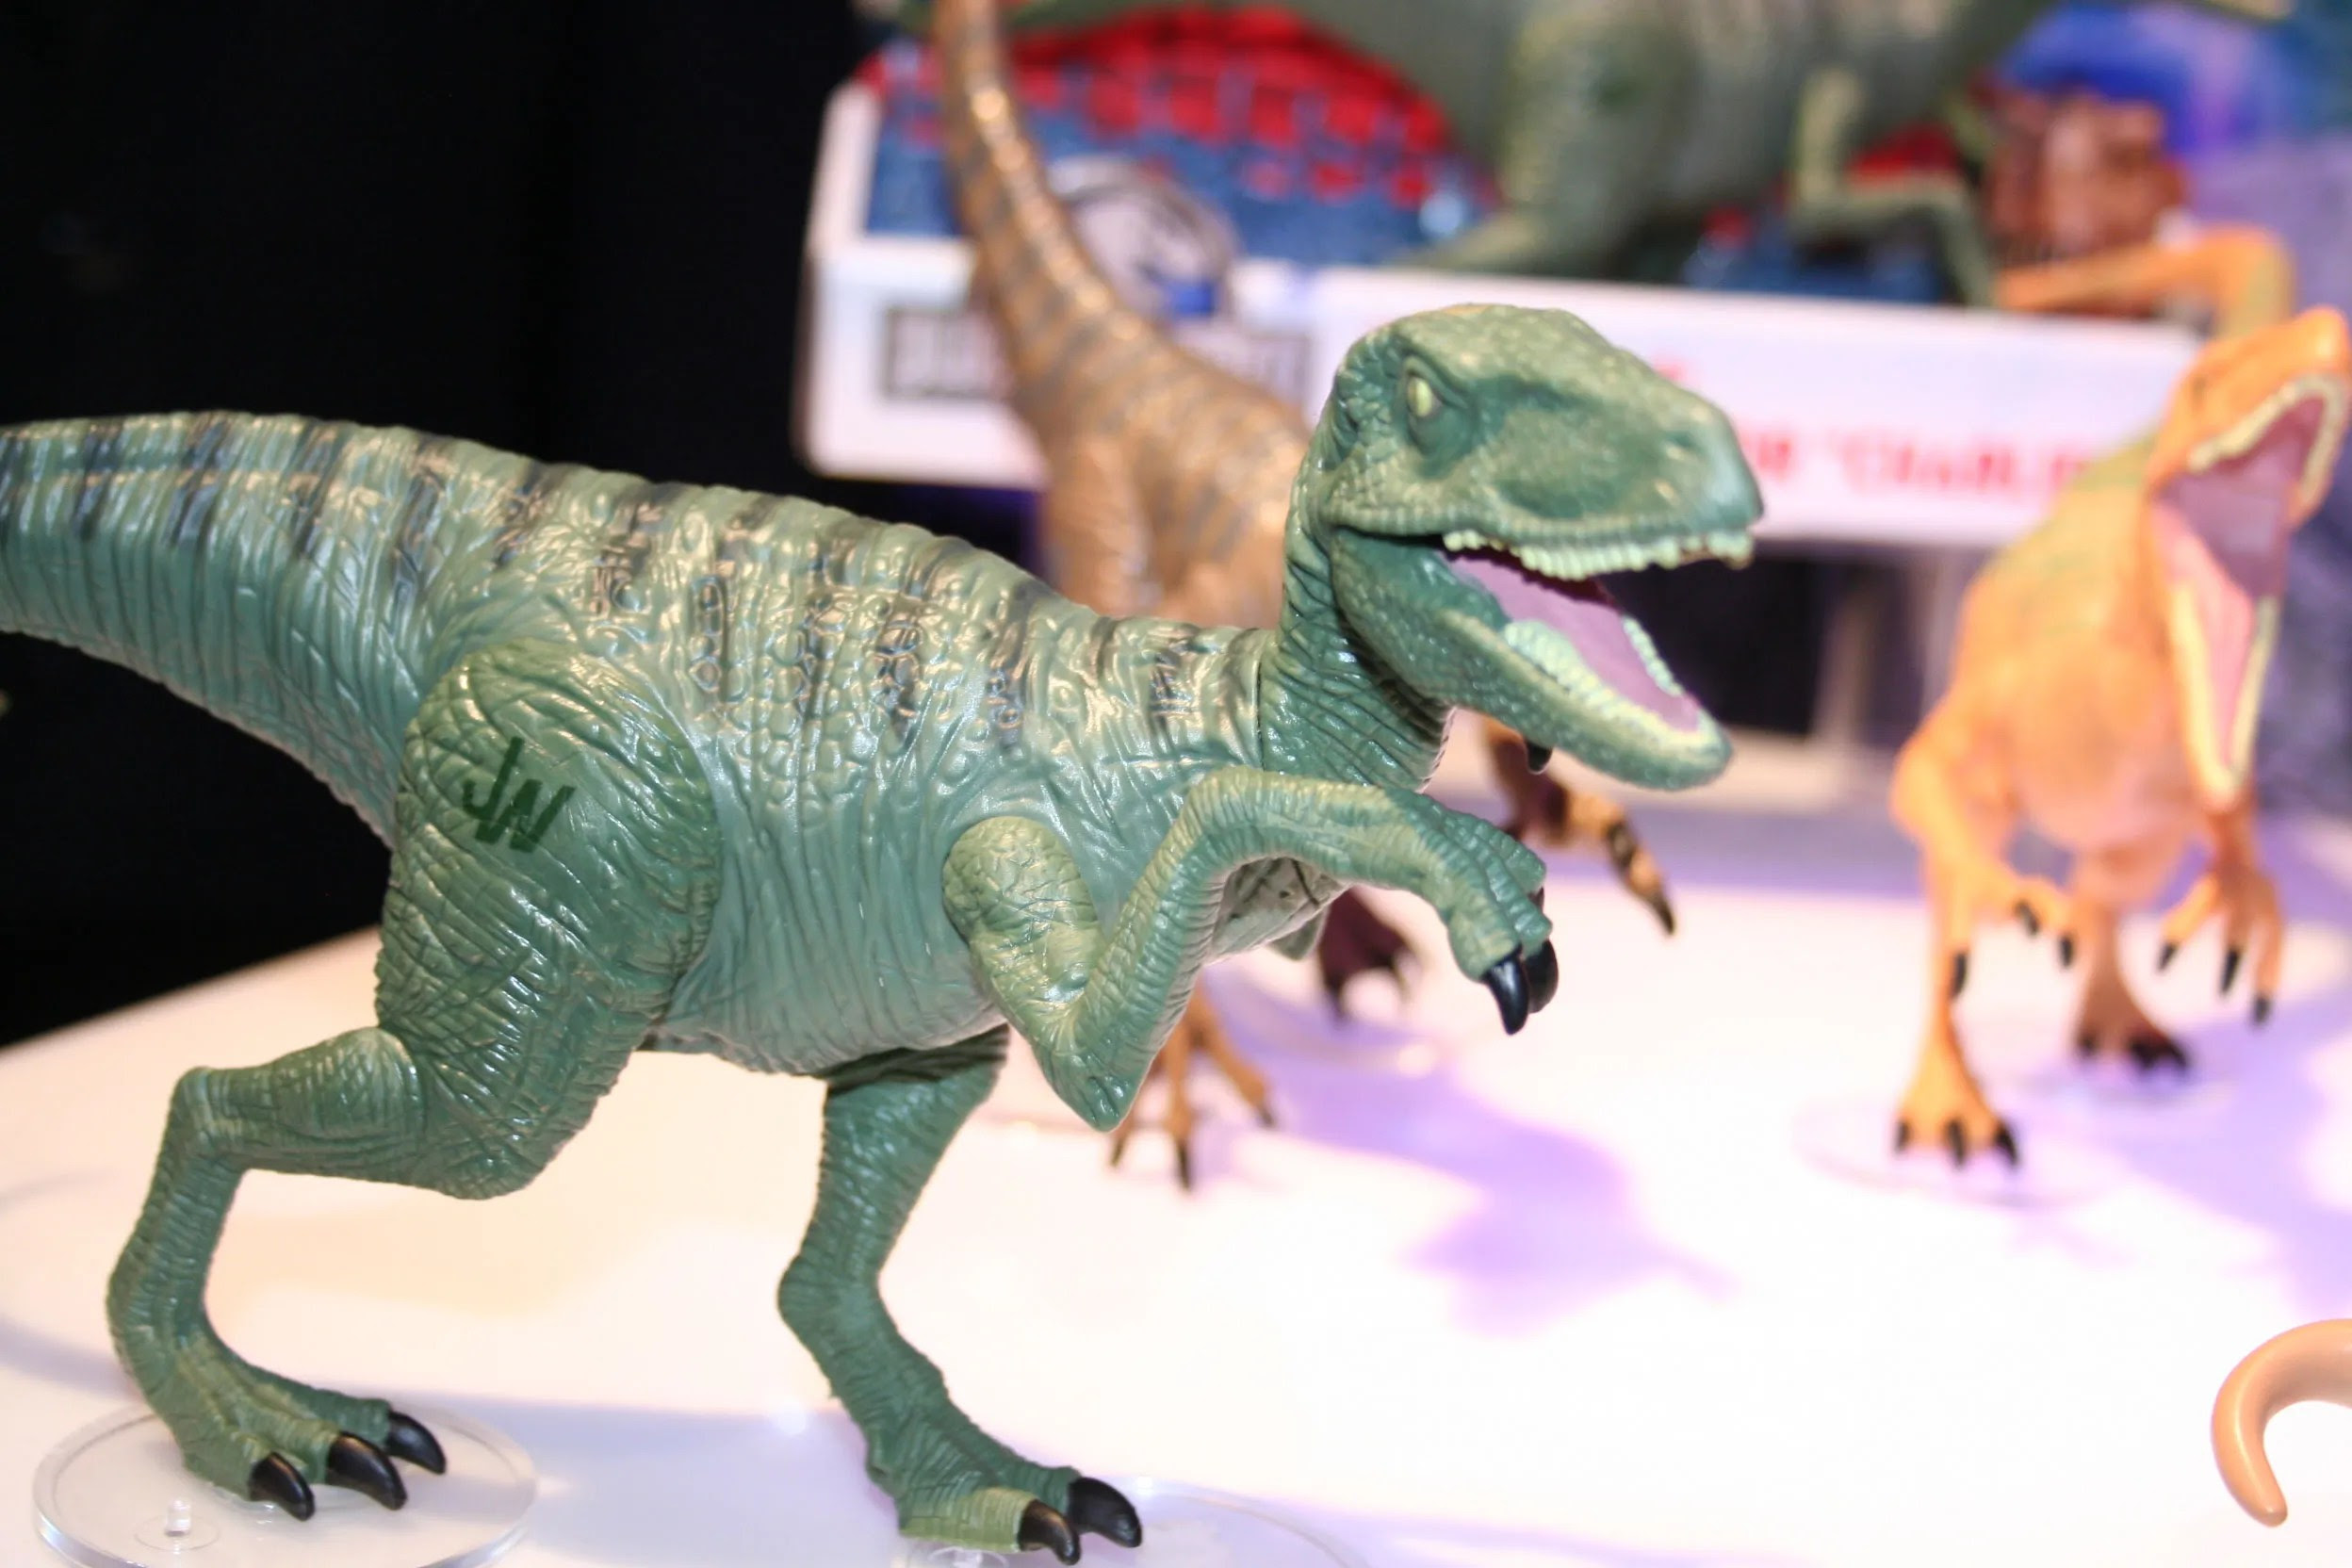 Web this year, the toy monster hq mon. toymonster international | global toy creators on instagram: Jurassic World Toy Images from Hasbro at Toy Fair 2015 Collider